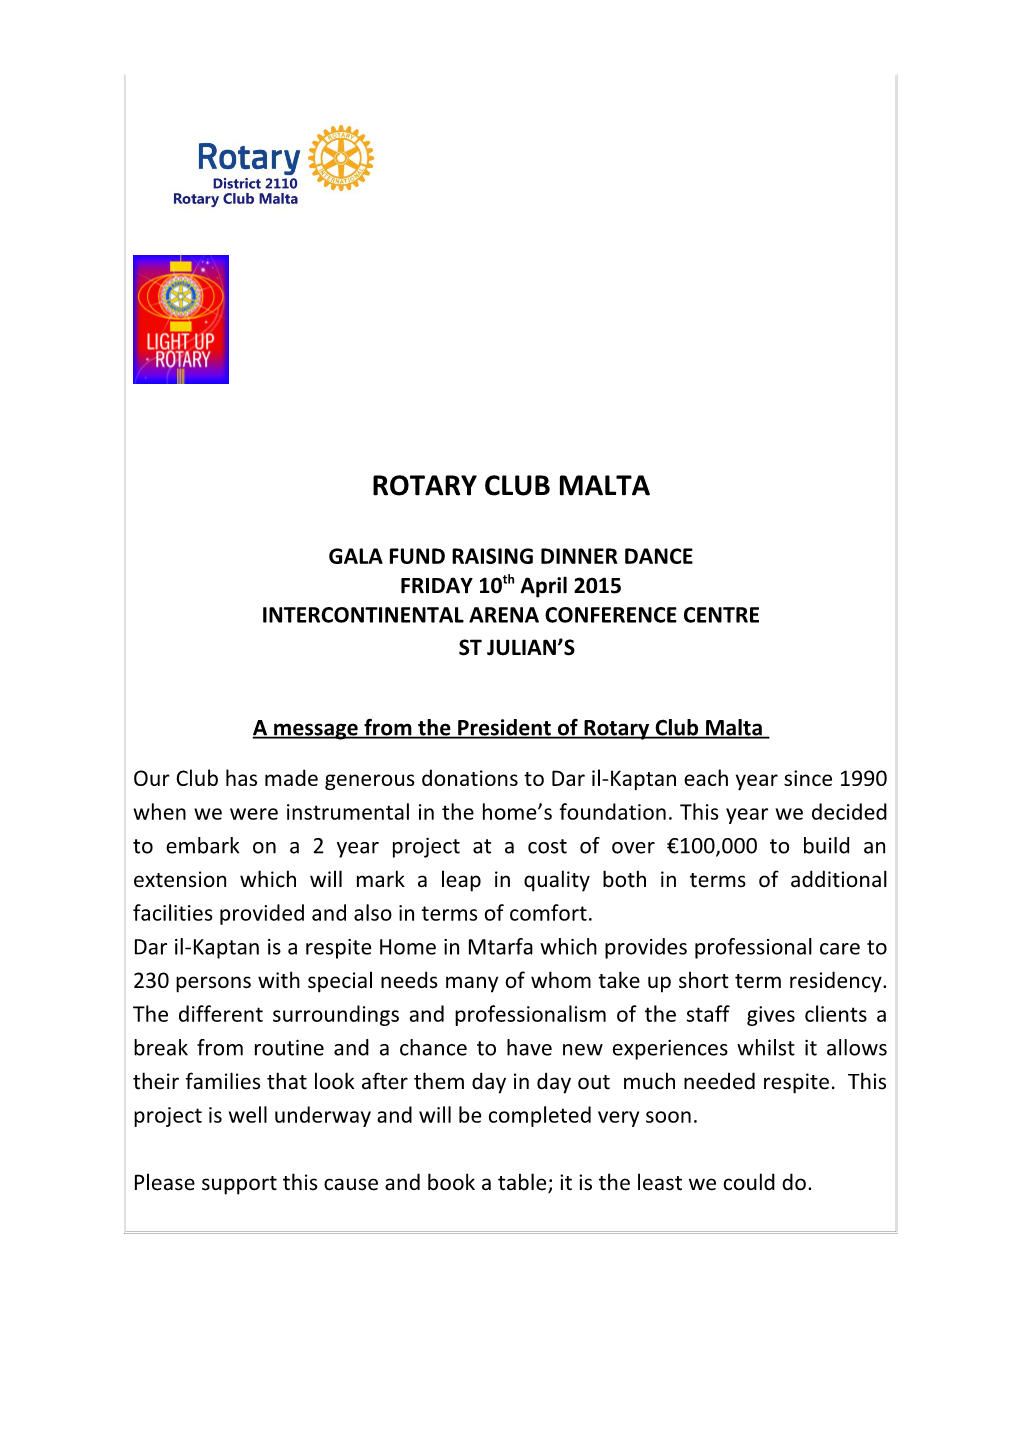 A Message from the President of Rotary Club Malta s1